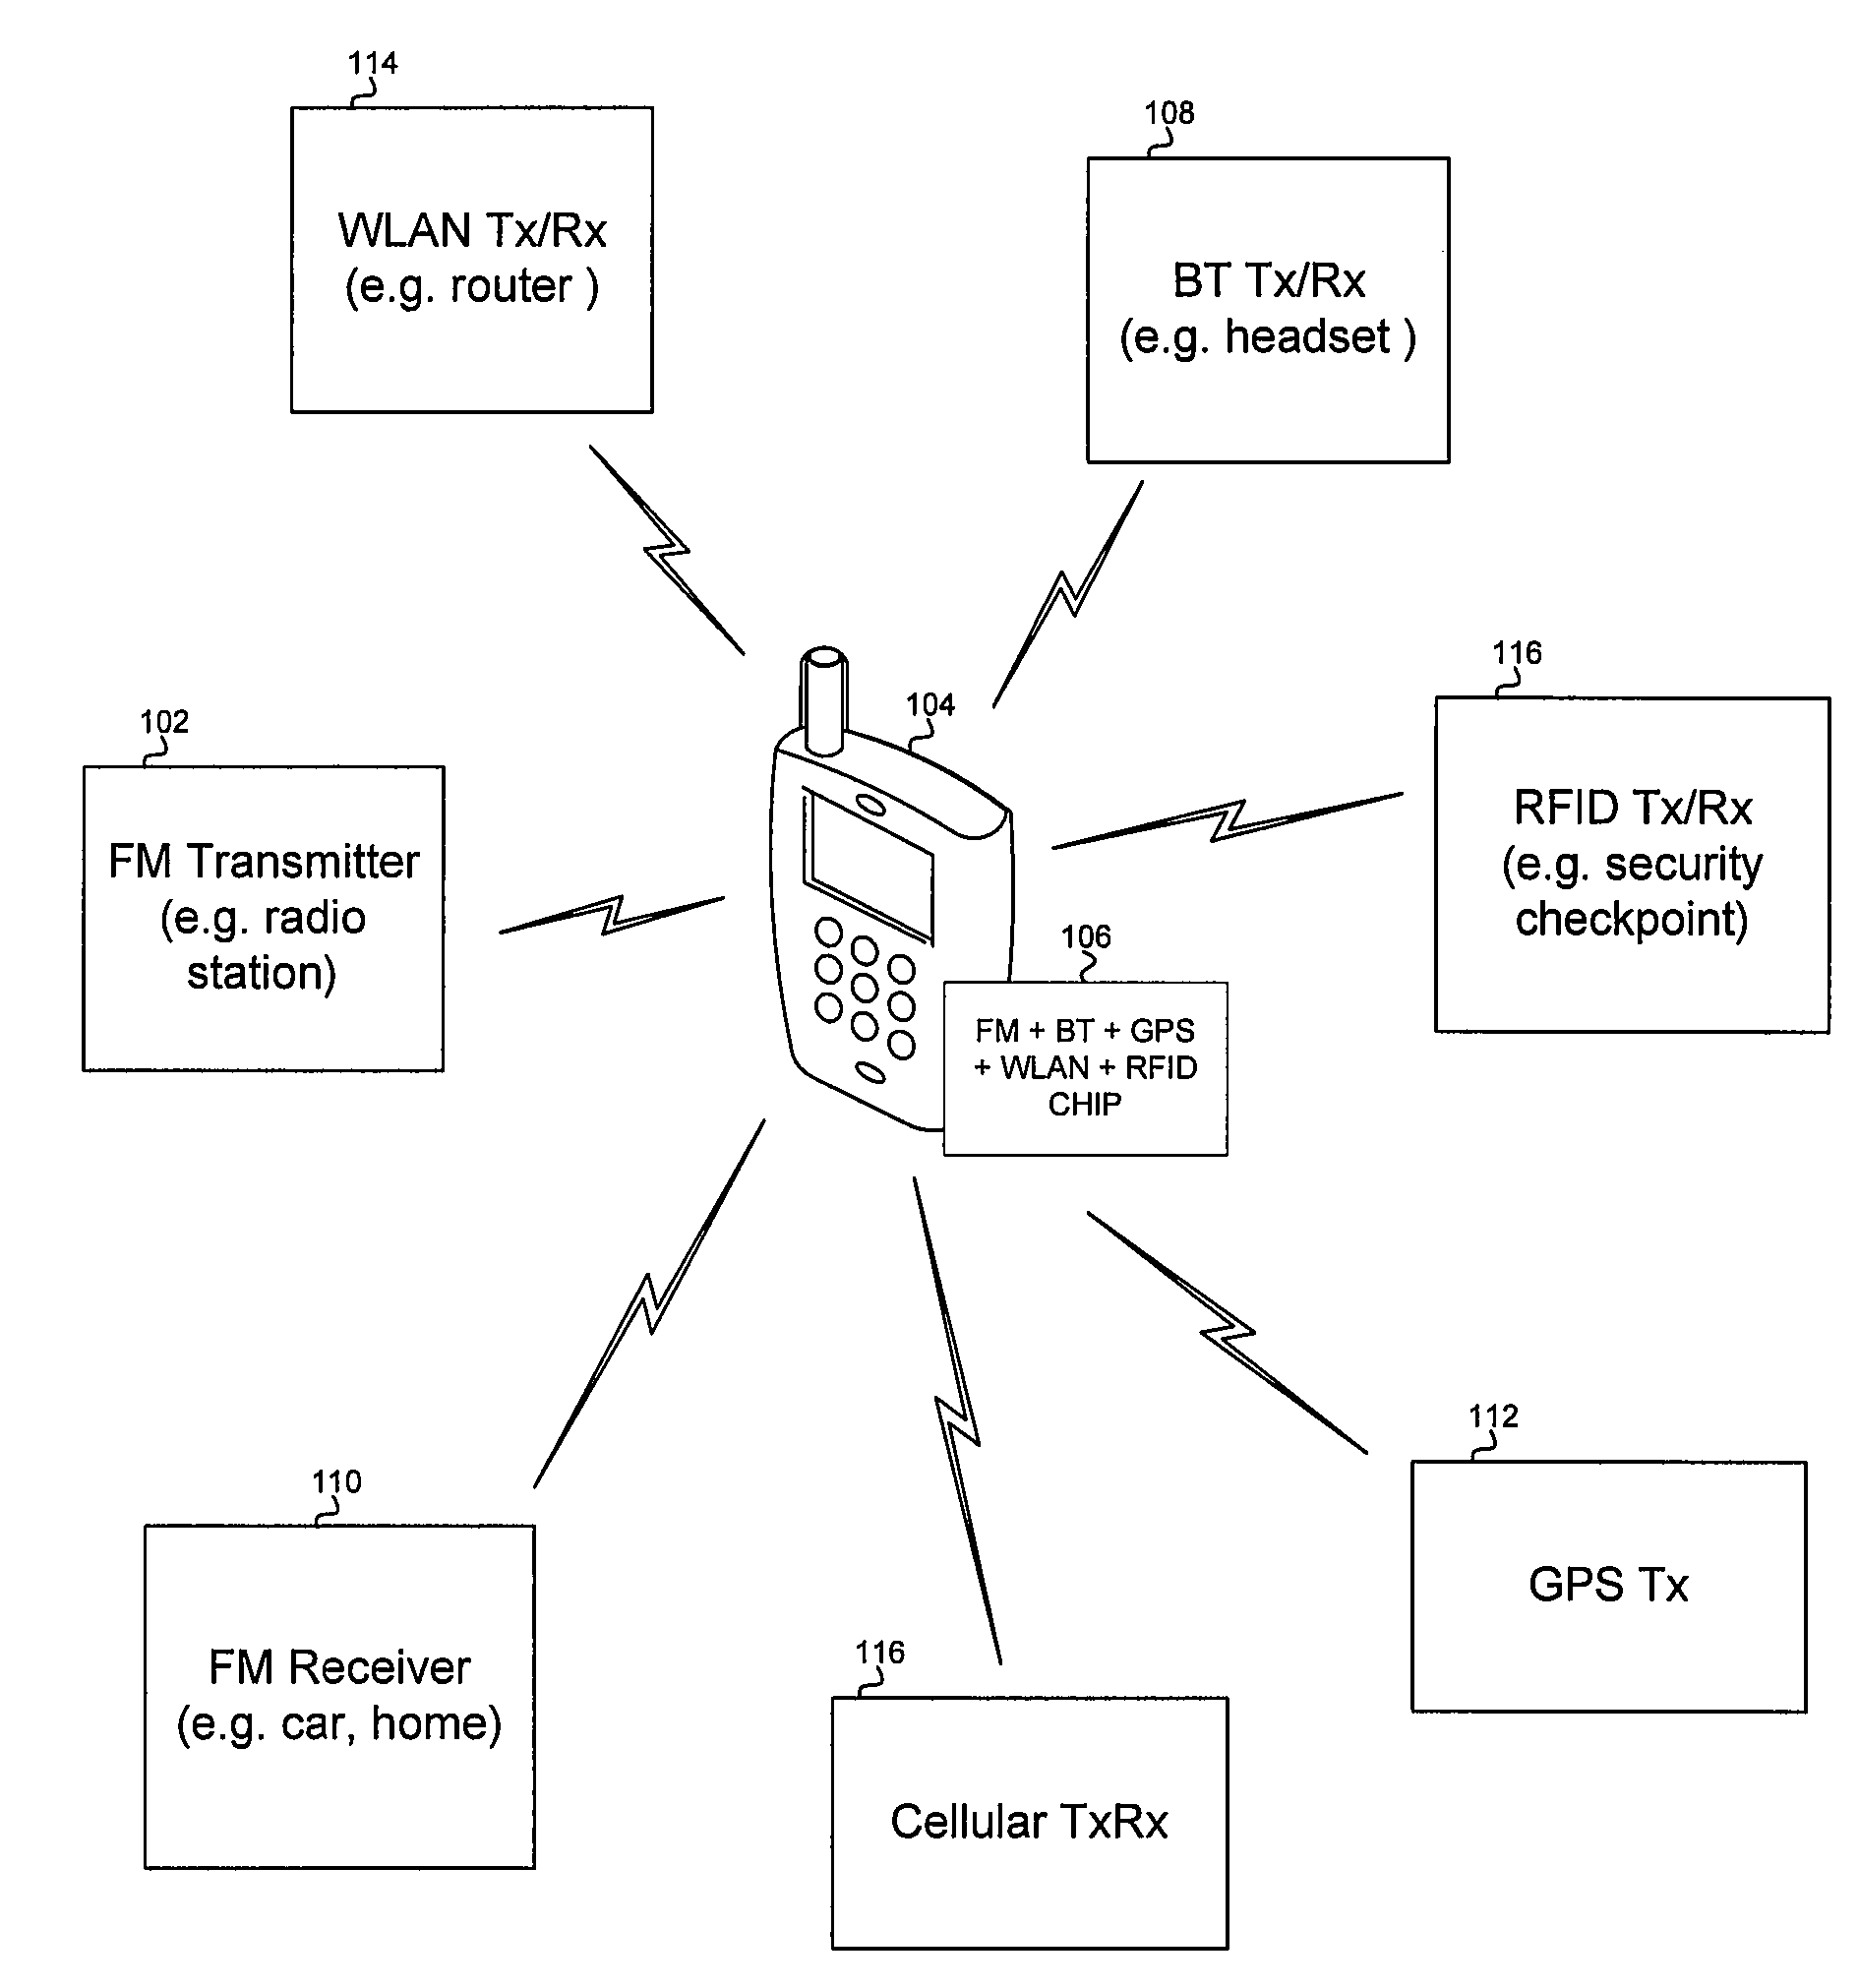 Method and system for an integrated vco and local oscillator architecture for an integrated FM transmitter and FM receiver